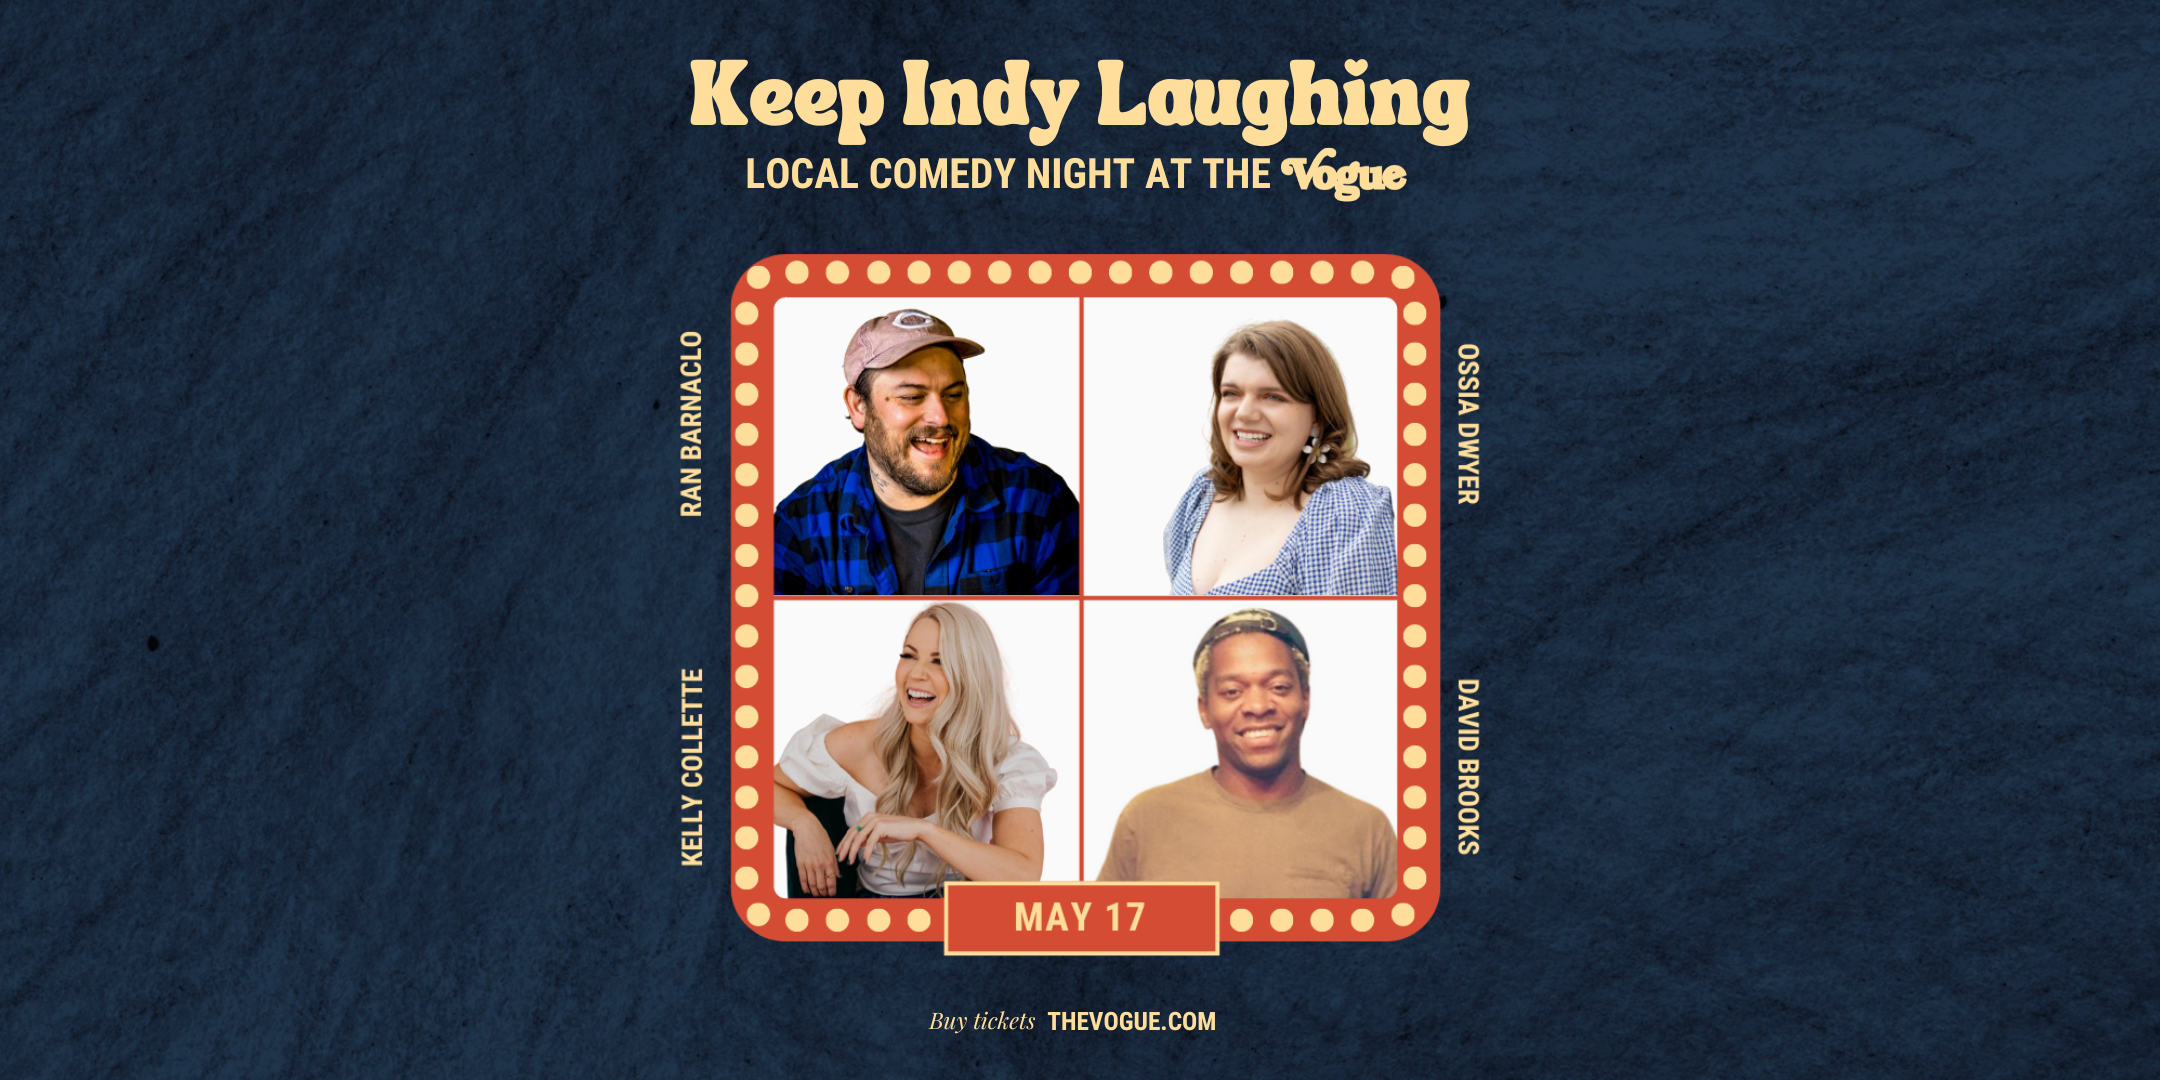 Keep Indy Laughing: Local Comedy Night